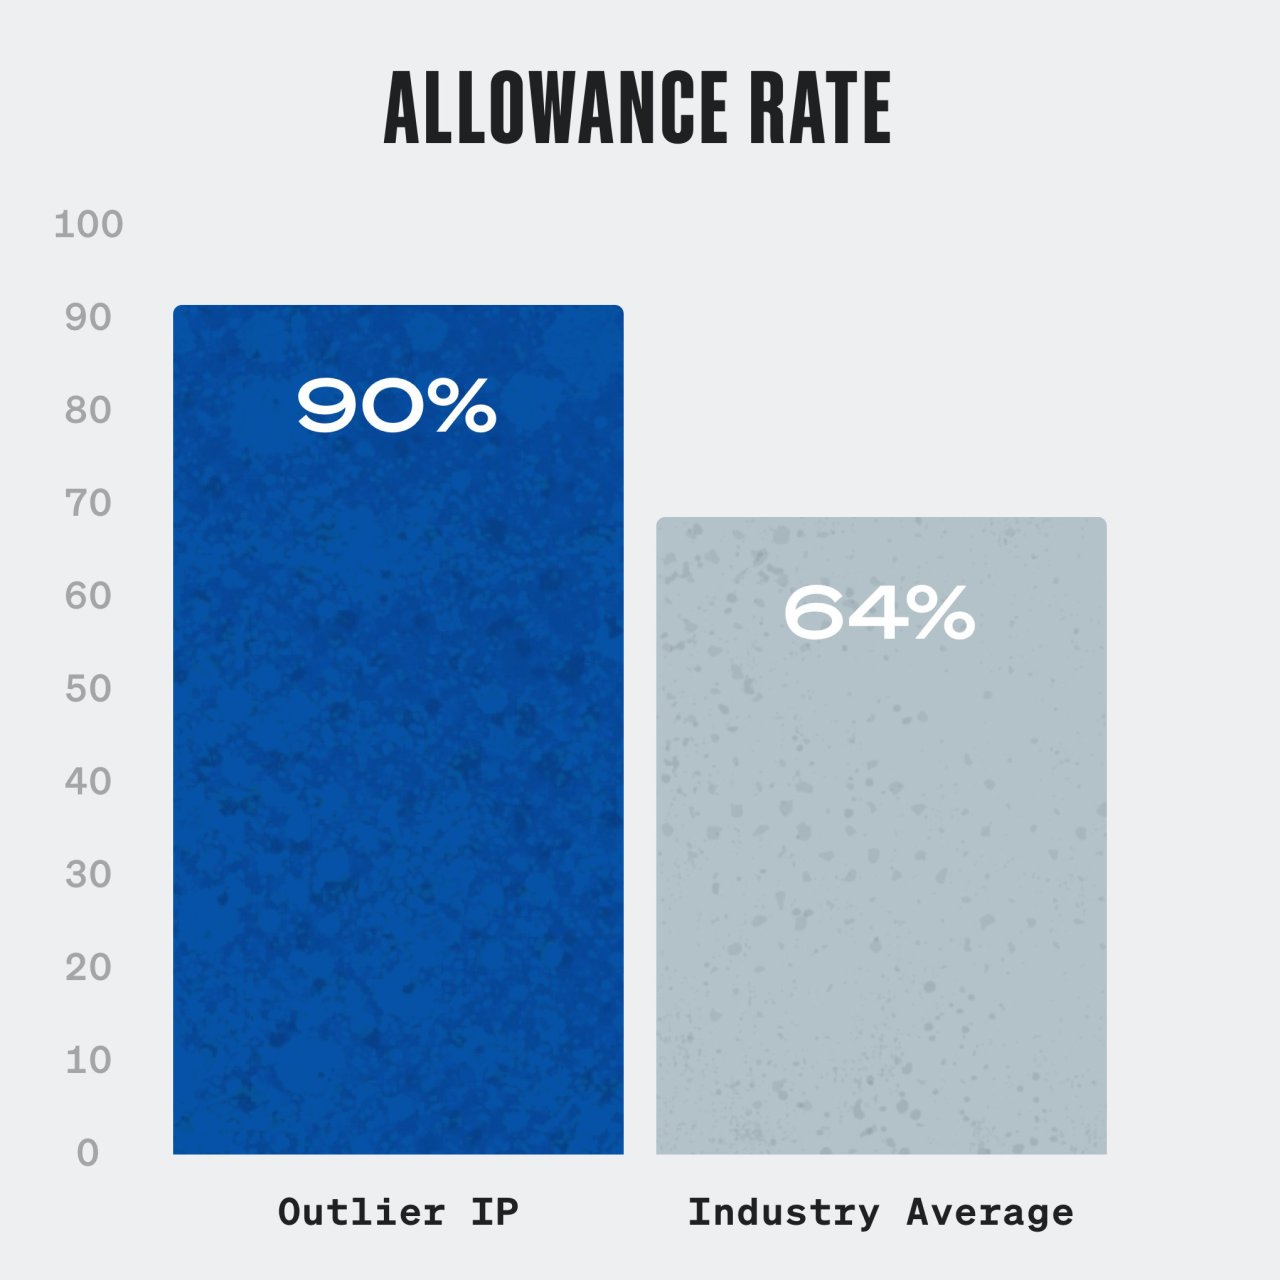 Outlier’s allowance rate is 90%, significantly higher than the industry average of 64%.